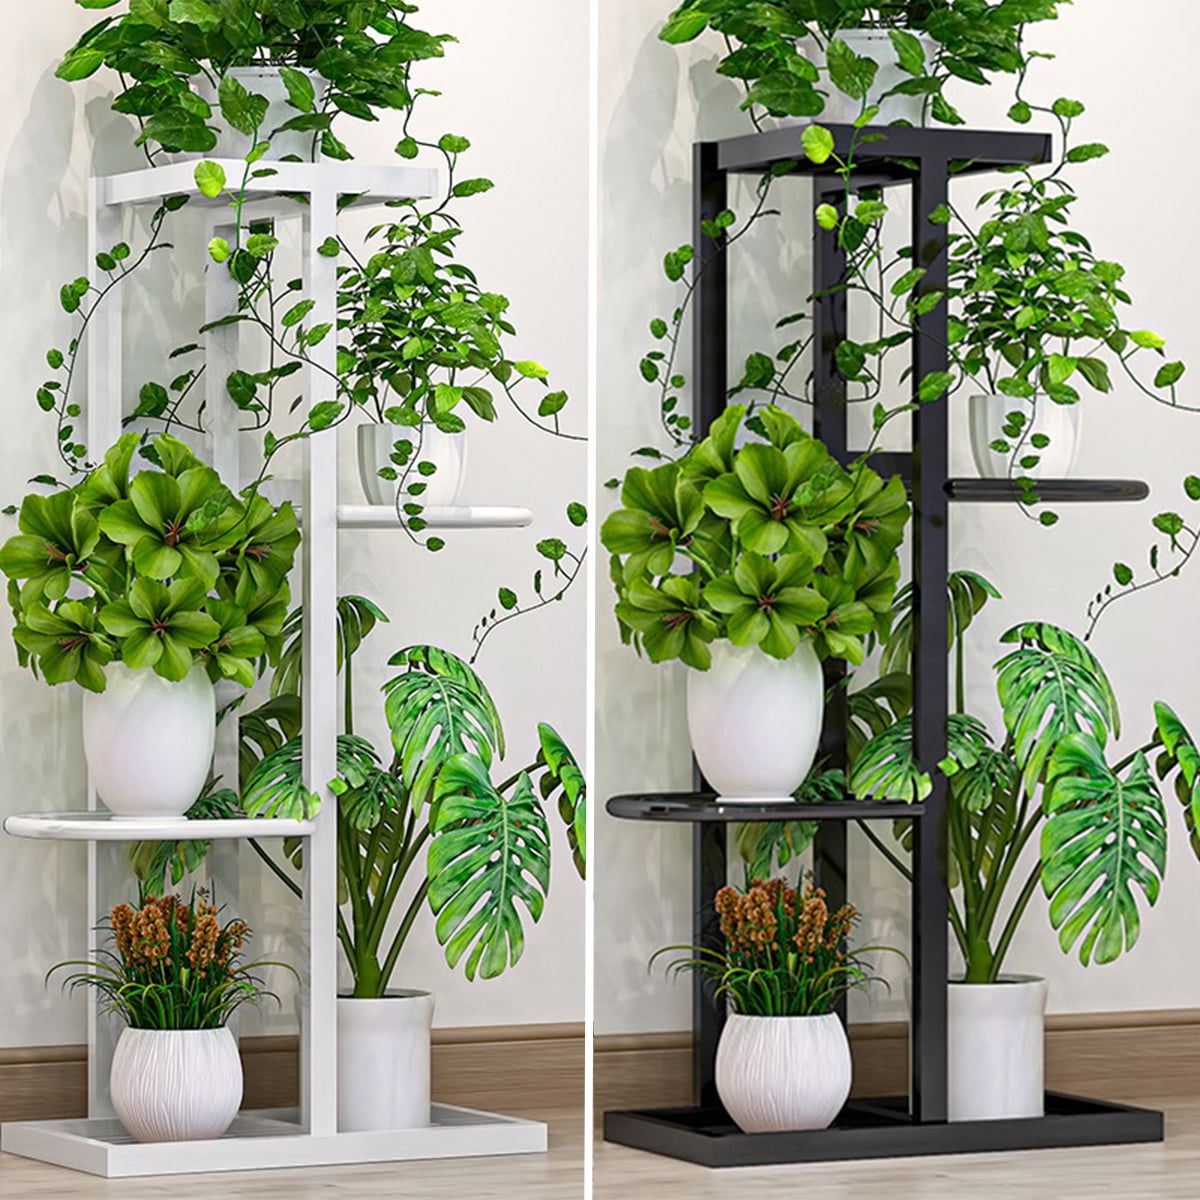 32 Inch Plant Stands Pertaining To Most Current 32 Inches Tall 4 Tier Multifunction Plant Flower Stand Flower Pot Display  Rack Dcorative Stand Garden Outdoor Indoor Decor – Walmart (View 12 of 15)